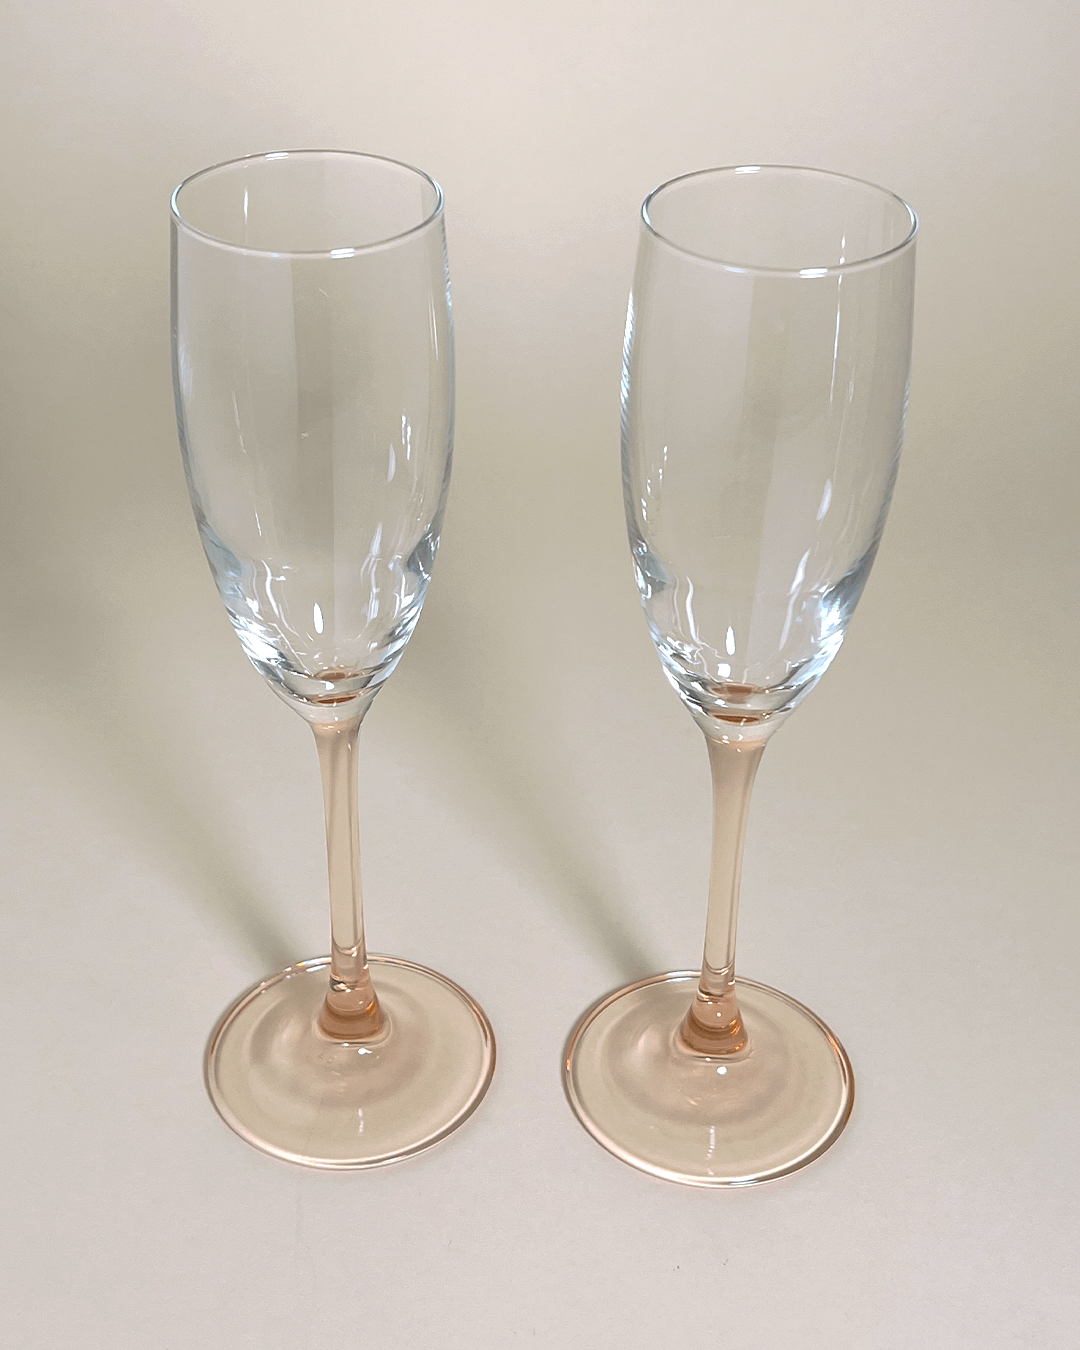 Champagne flutes with a pink stem to cheer with on your next celebration. The glasses come in a set of 2.